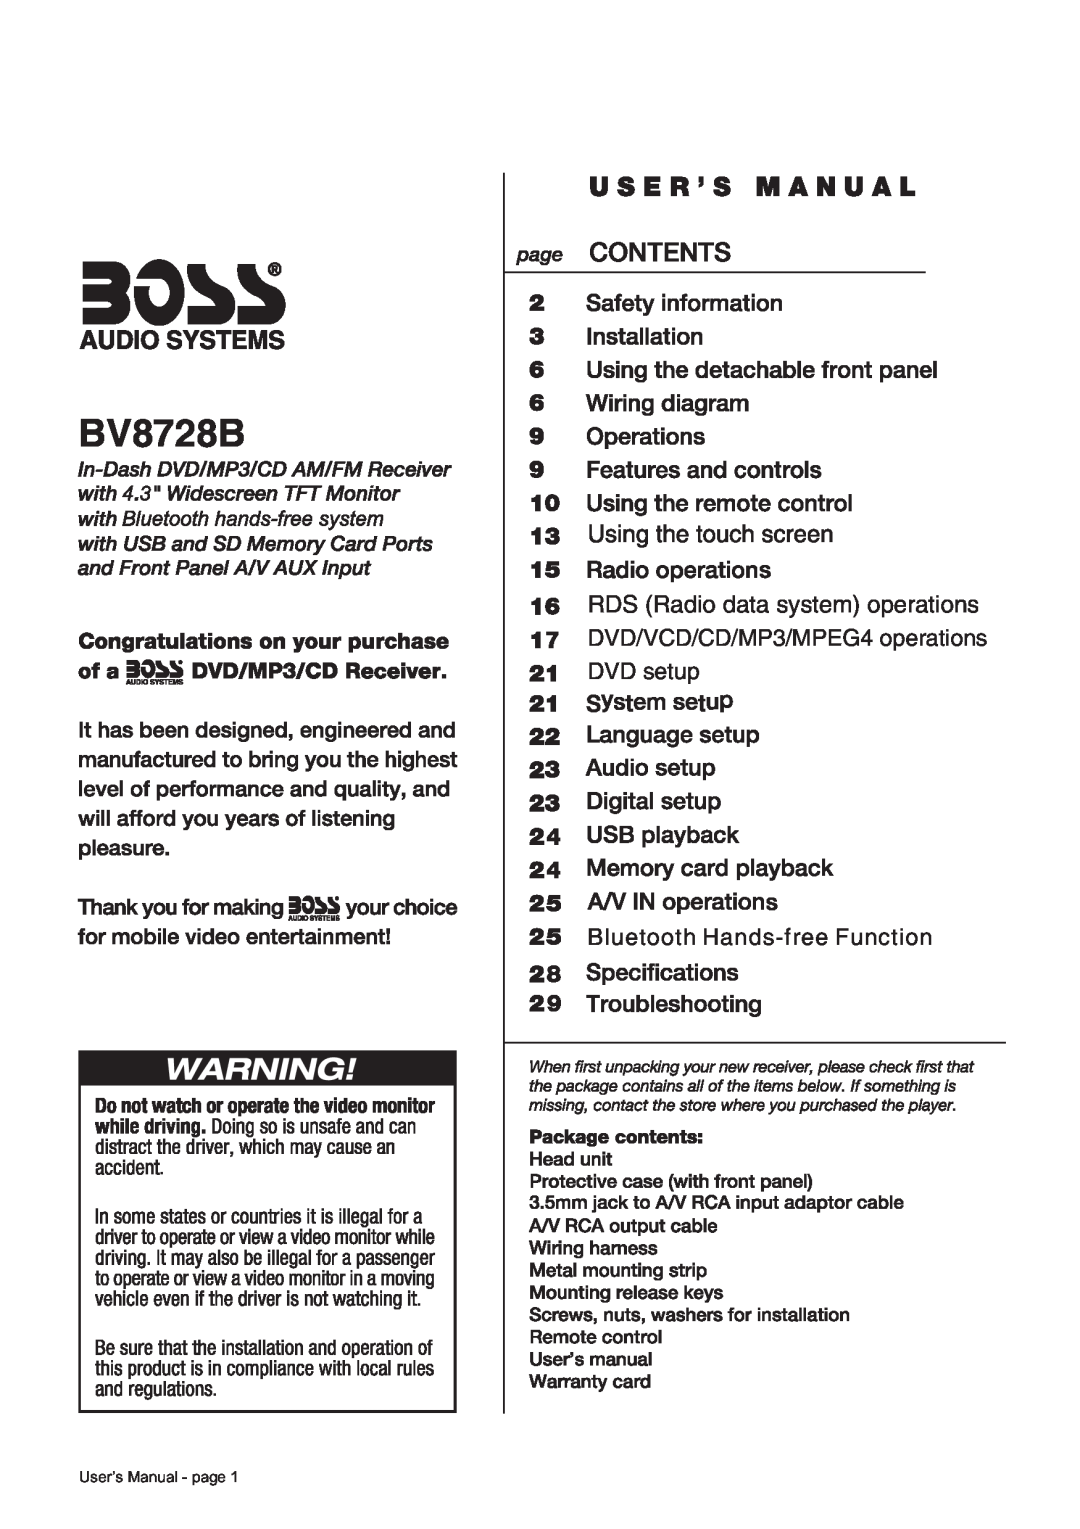 Boss Audio Systems BV8728B manual RDS Radio data system operations, DVD/VCD/CD/MP3/MPEG4 operations, DVD setup 